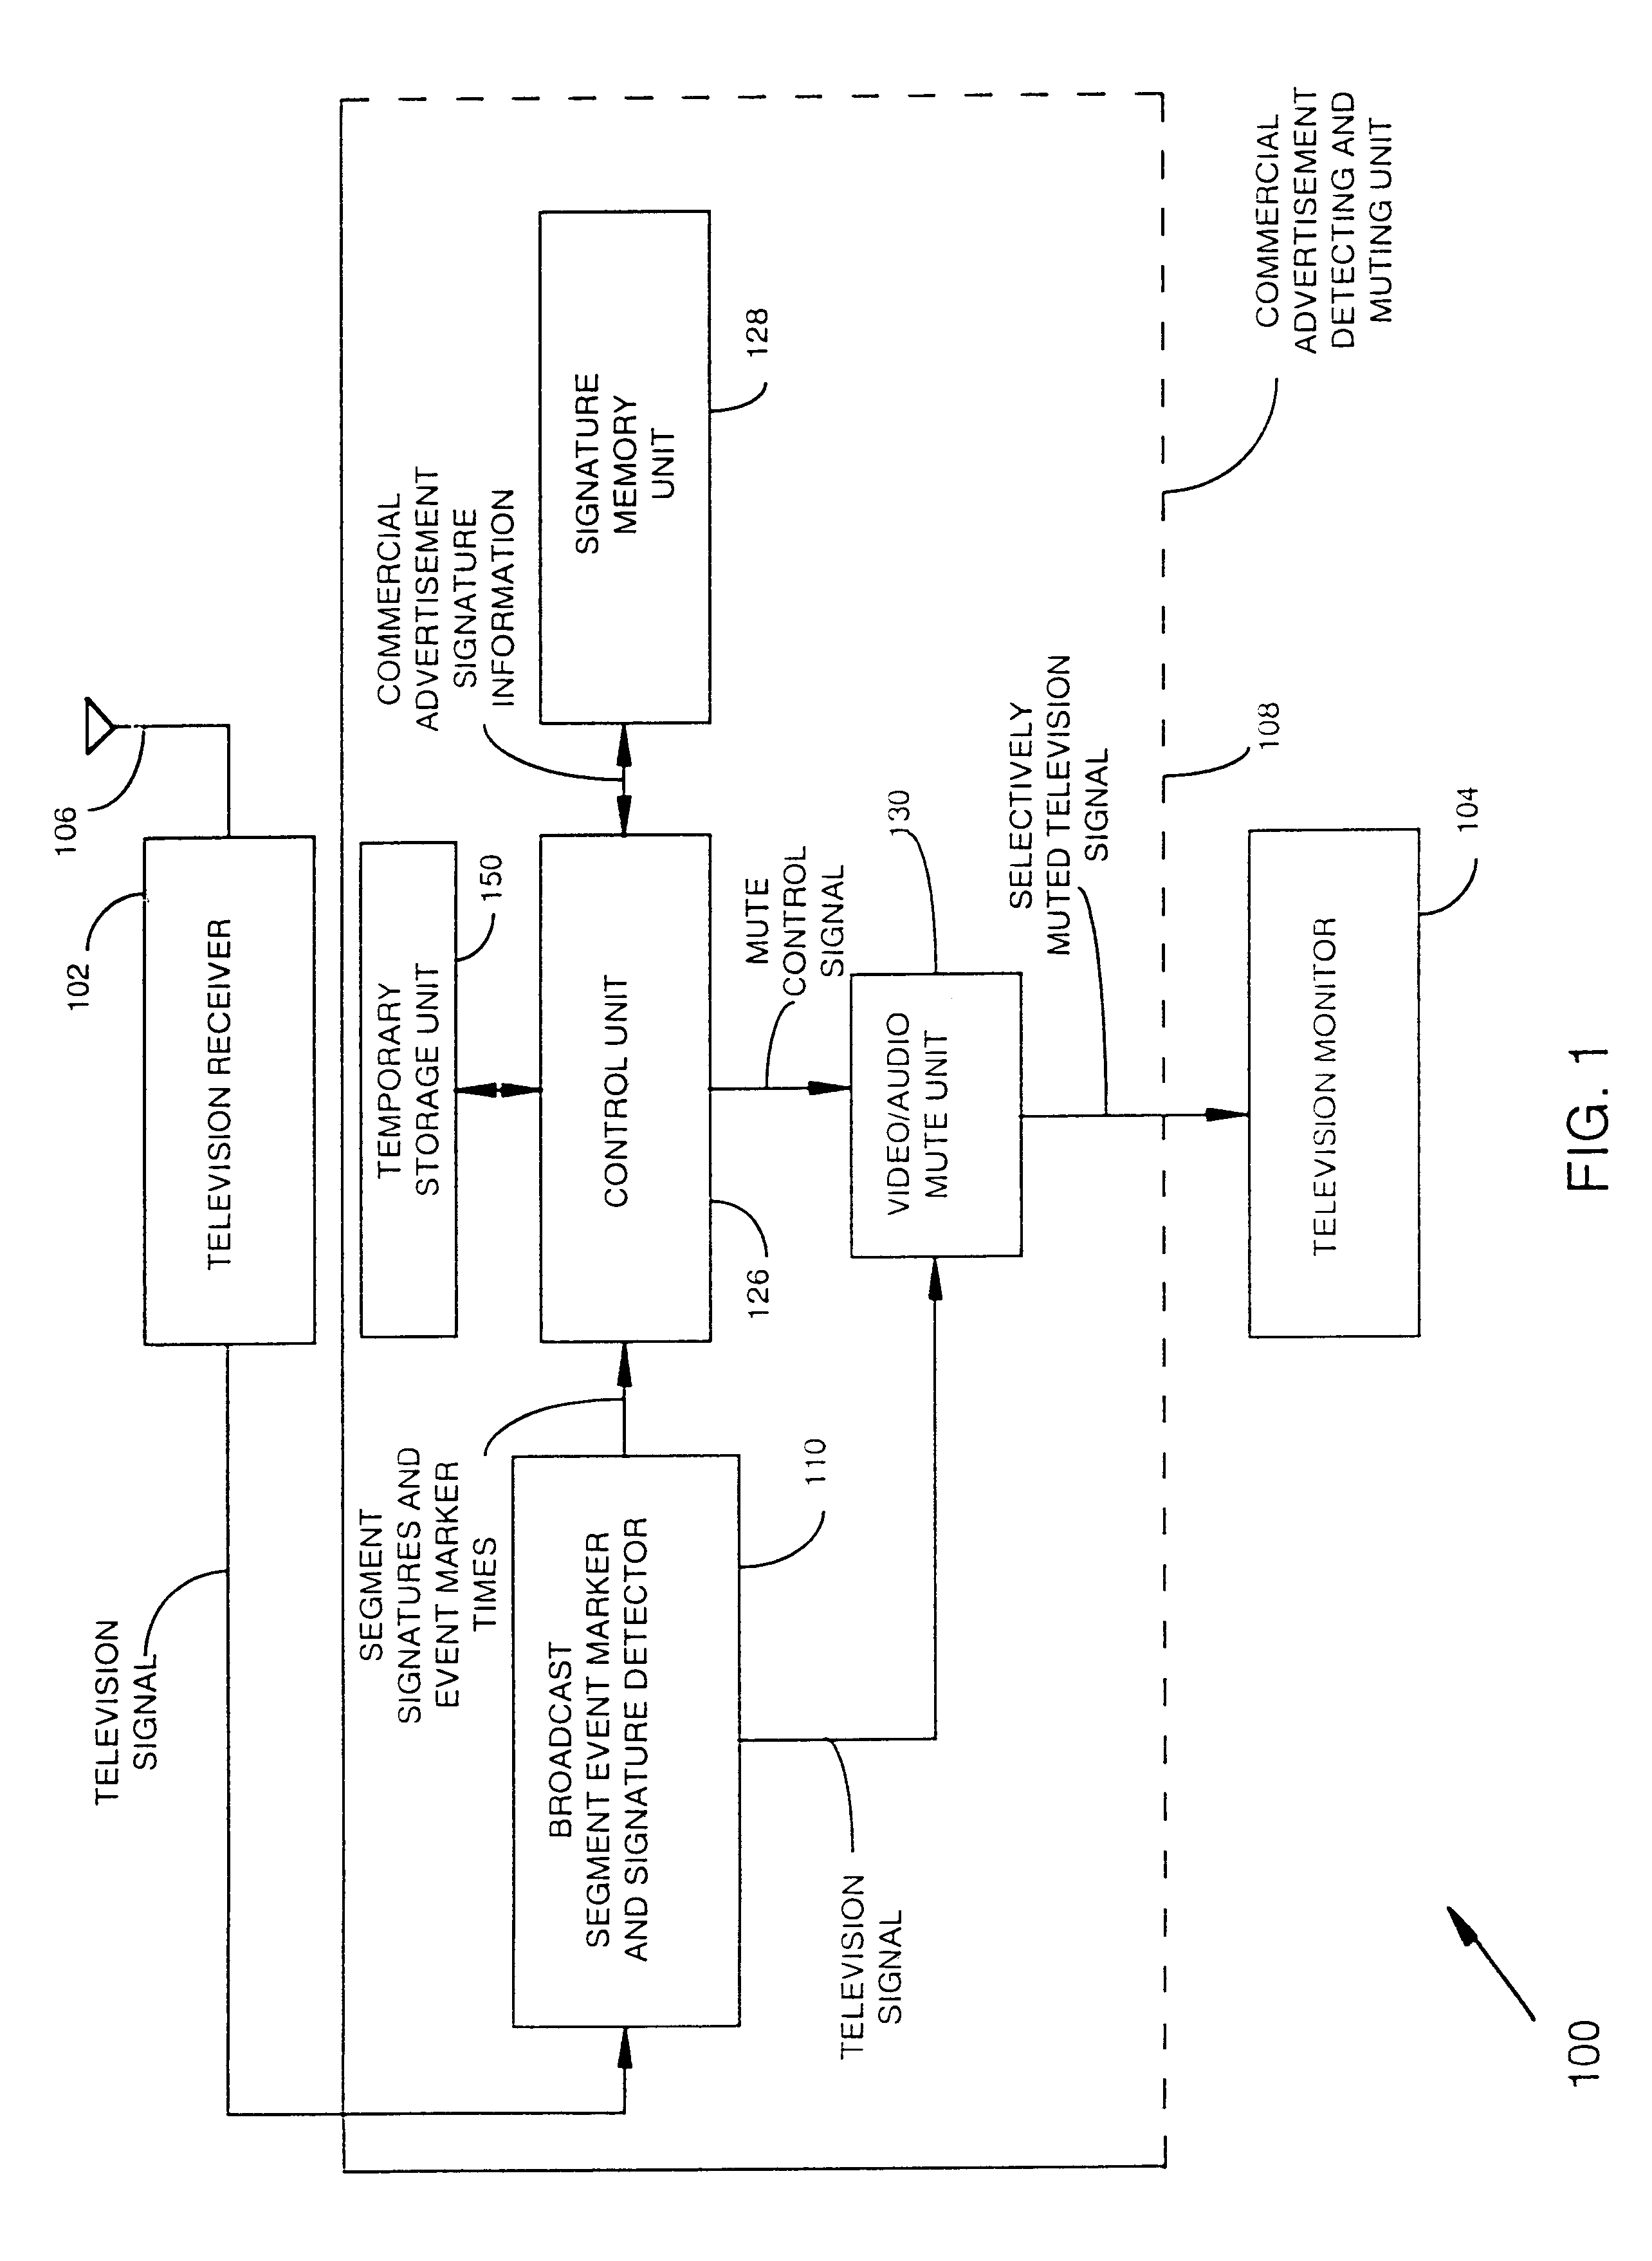 Method and apparatus for controlling a videotape recorder in real-time to automatically identify and selectively skip segments of a television broadcast signal during recording of the television signal